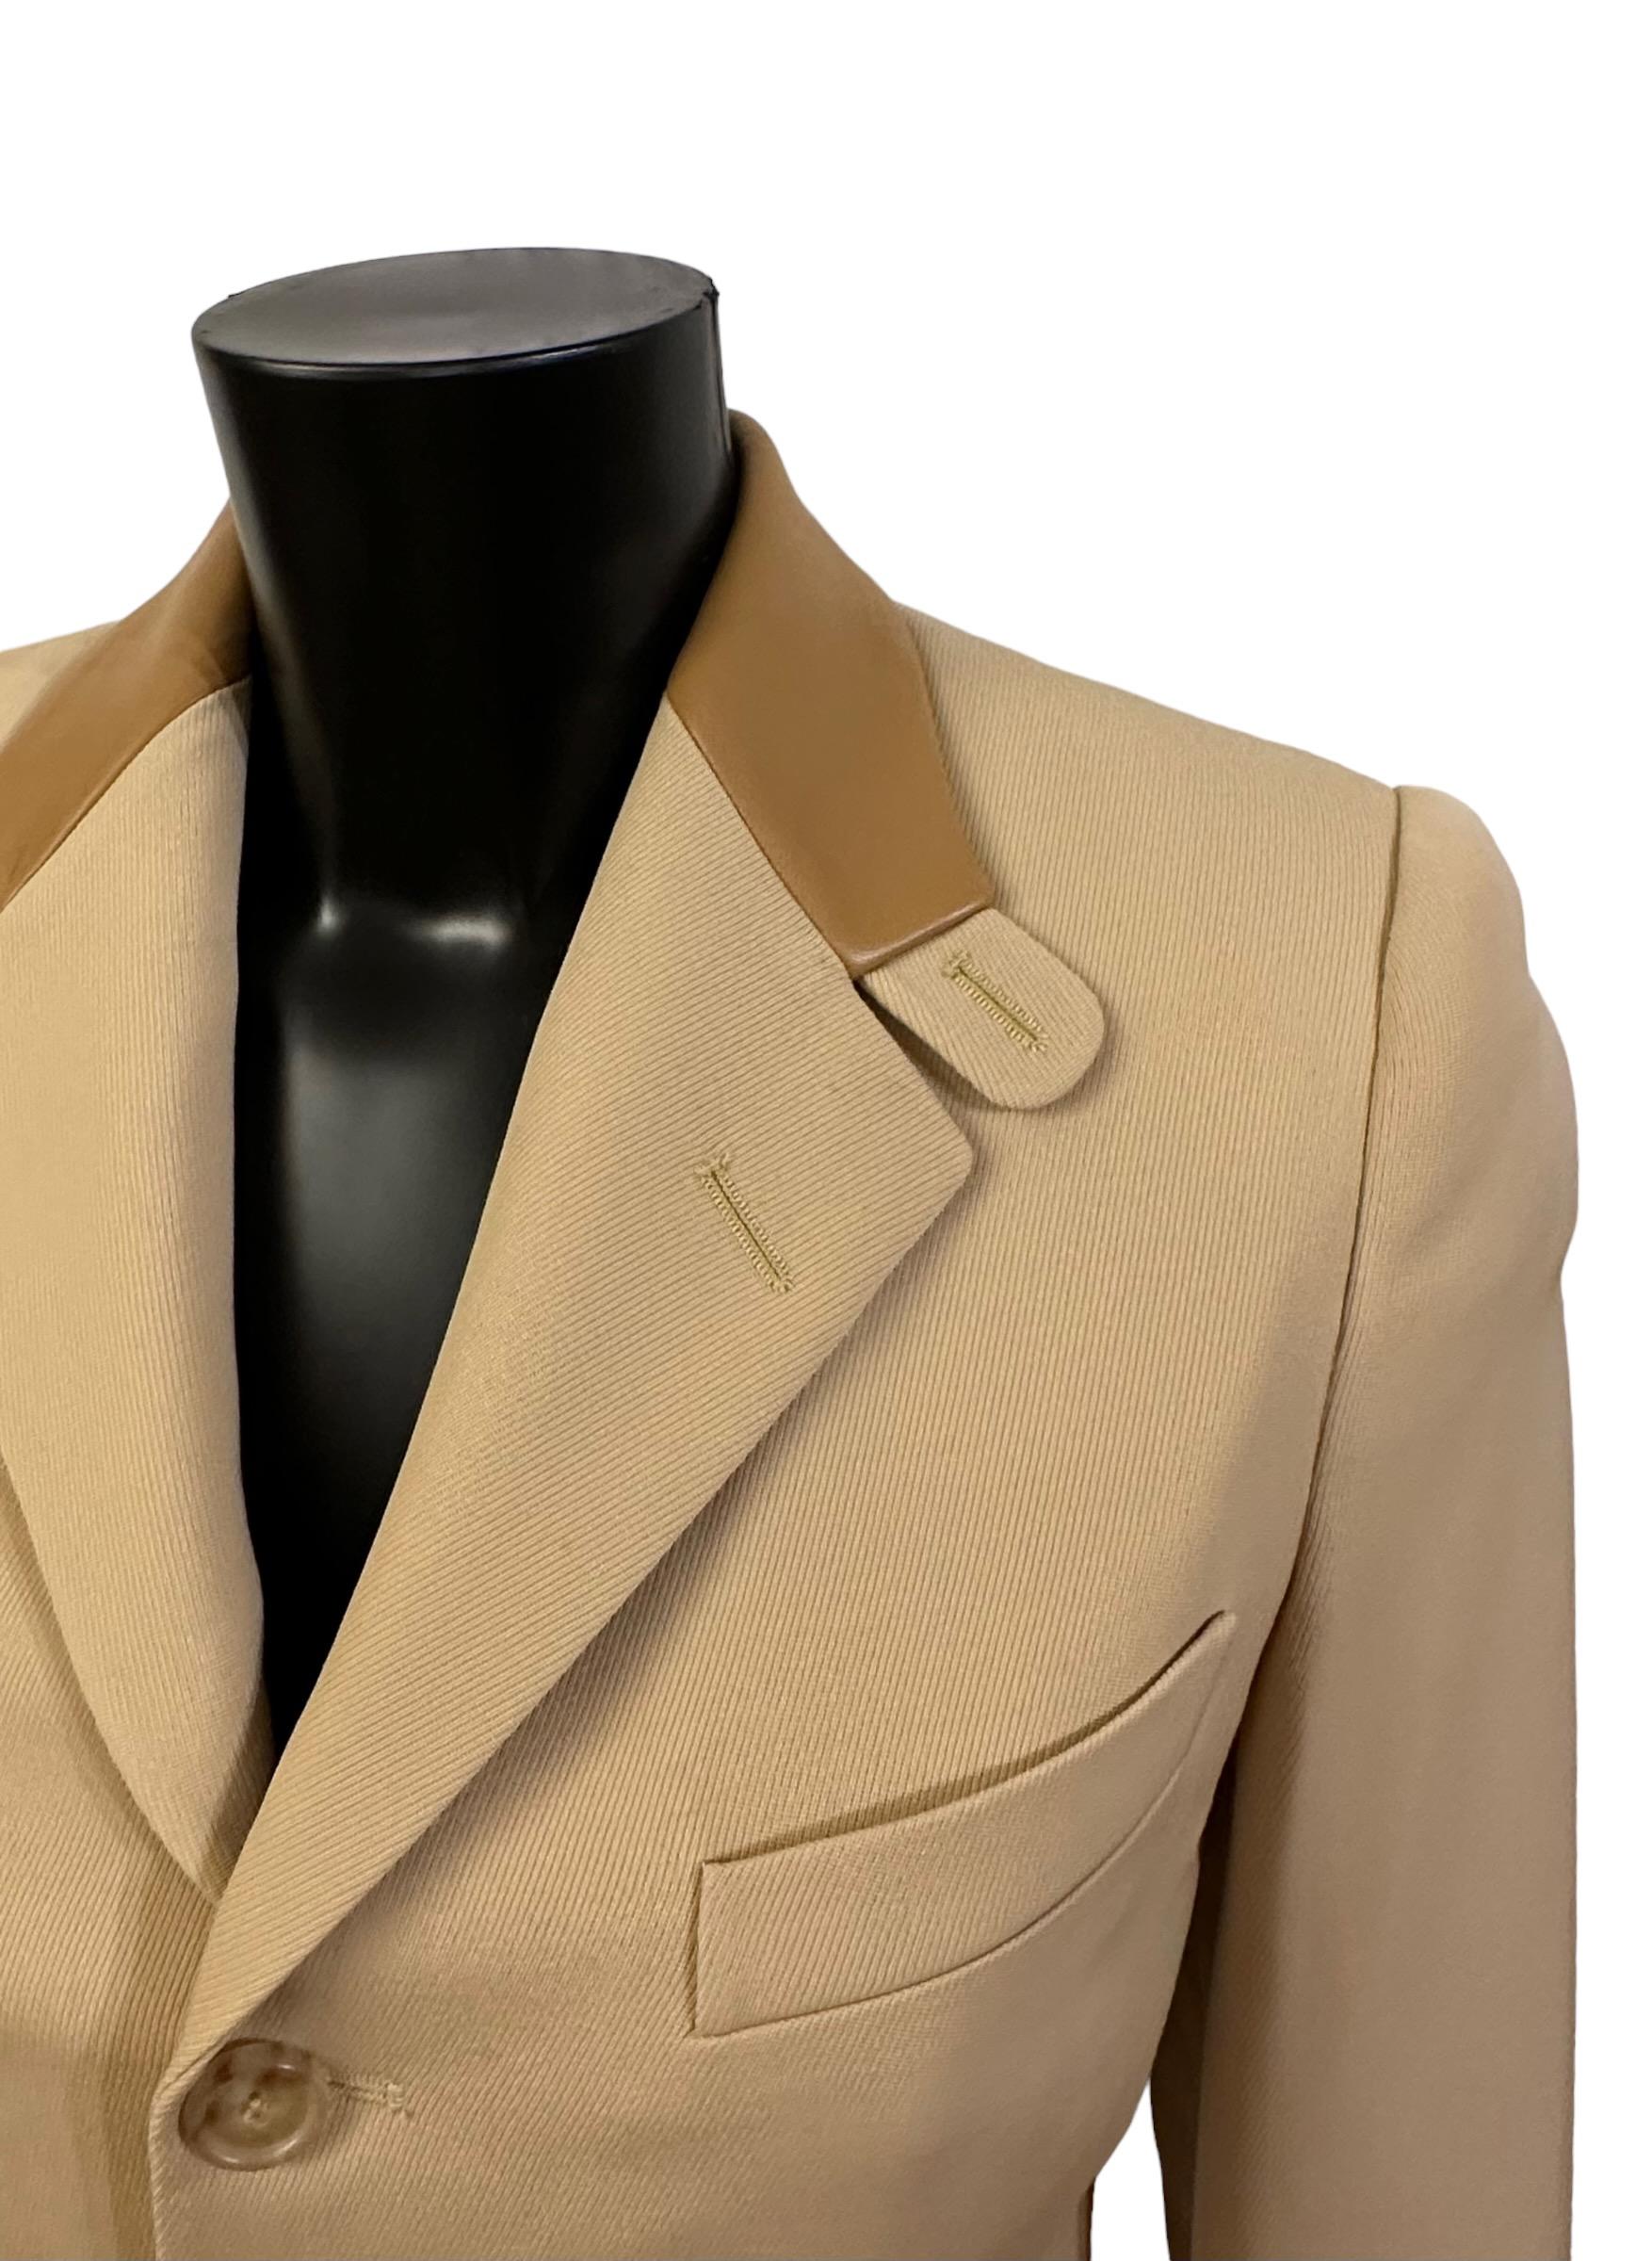 This pre-owned but new Ralph Lauren Purple Label jacket is super chic.
Single breasted it is crafted in a classic beige tone.
It features a leather collar, 4 buttons, 3 pockets and 1 breast pocket.
It is slightly fitted and 2 buttons at the waist in